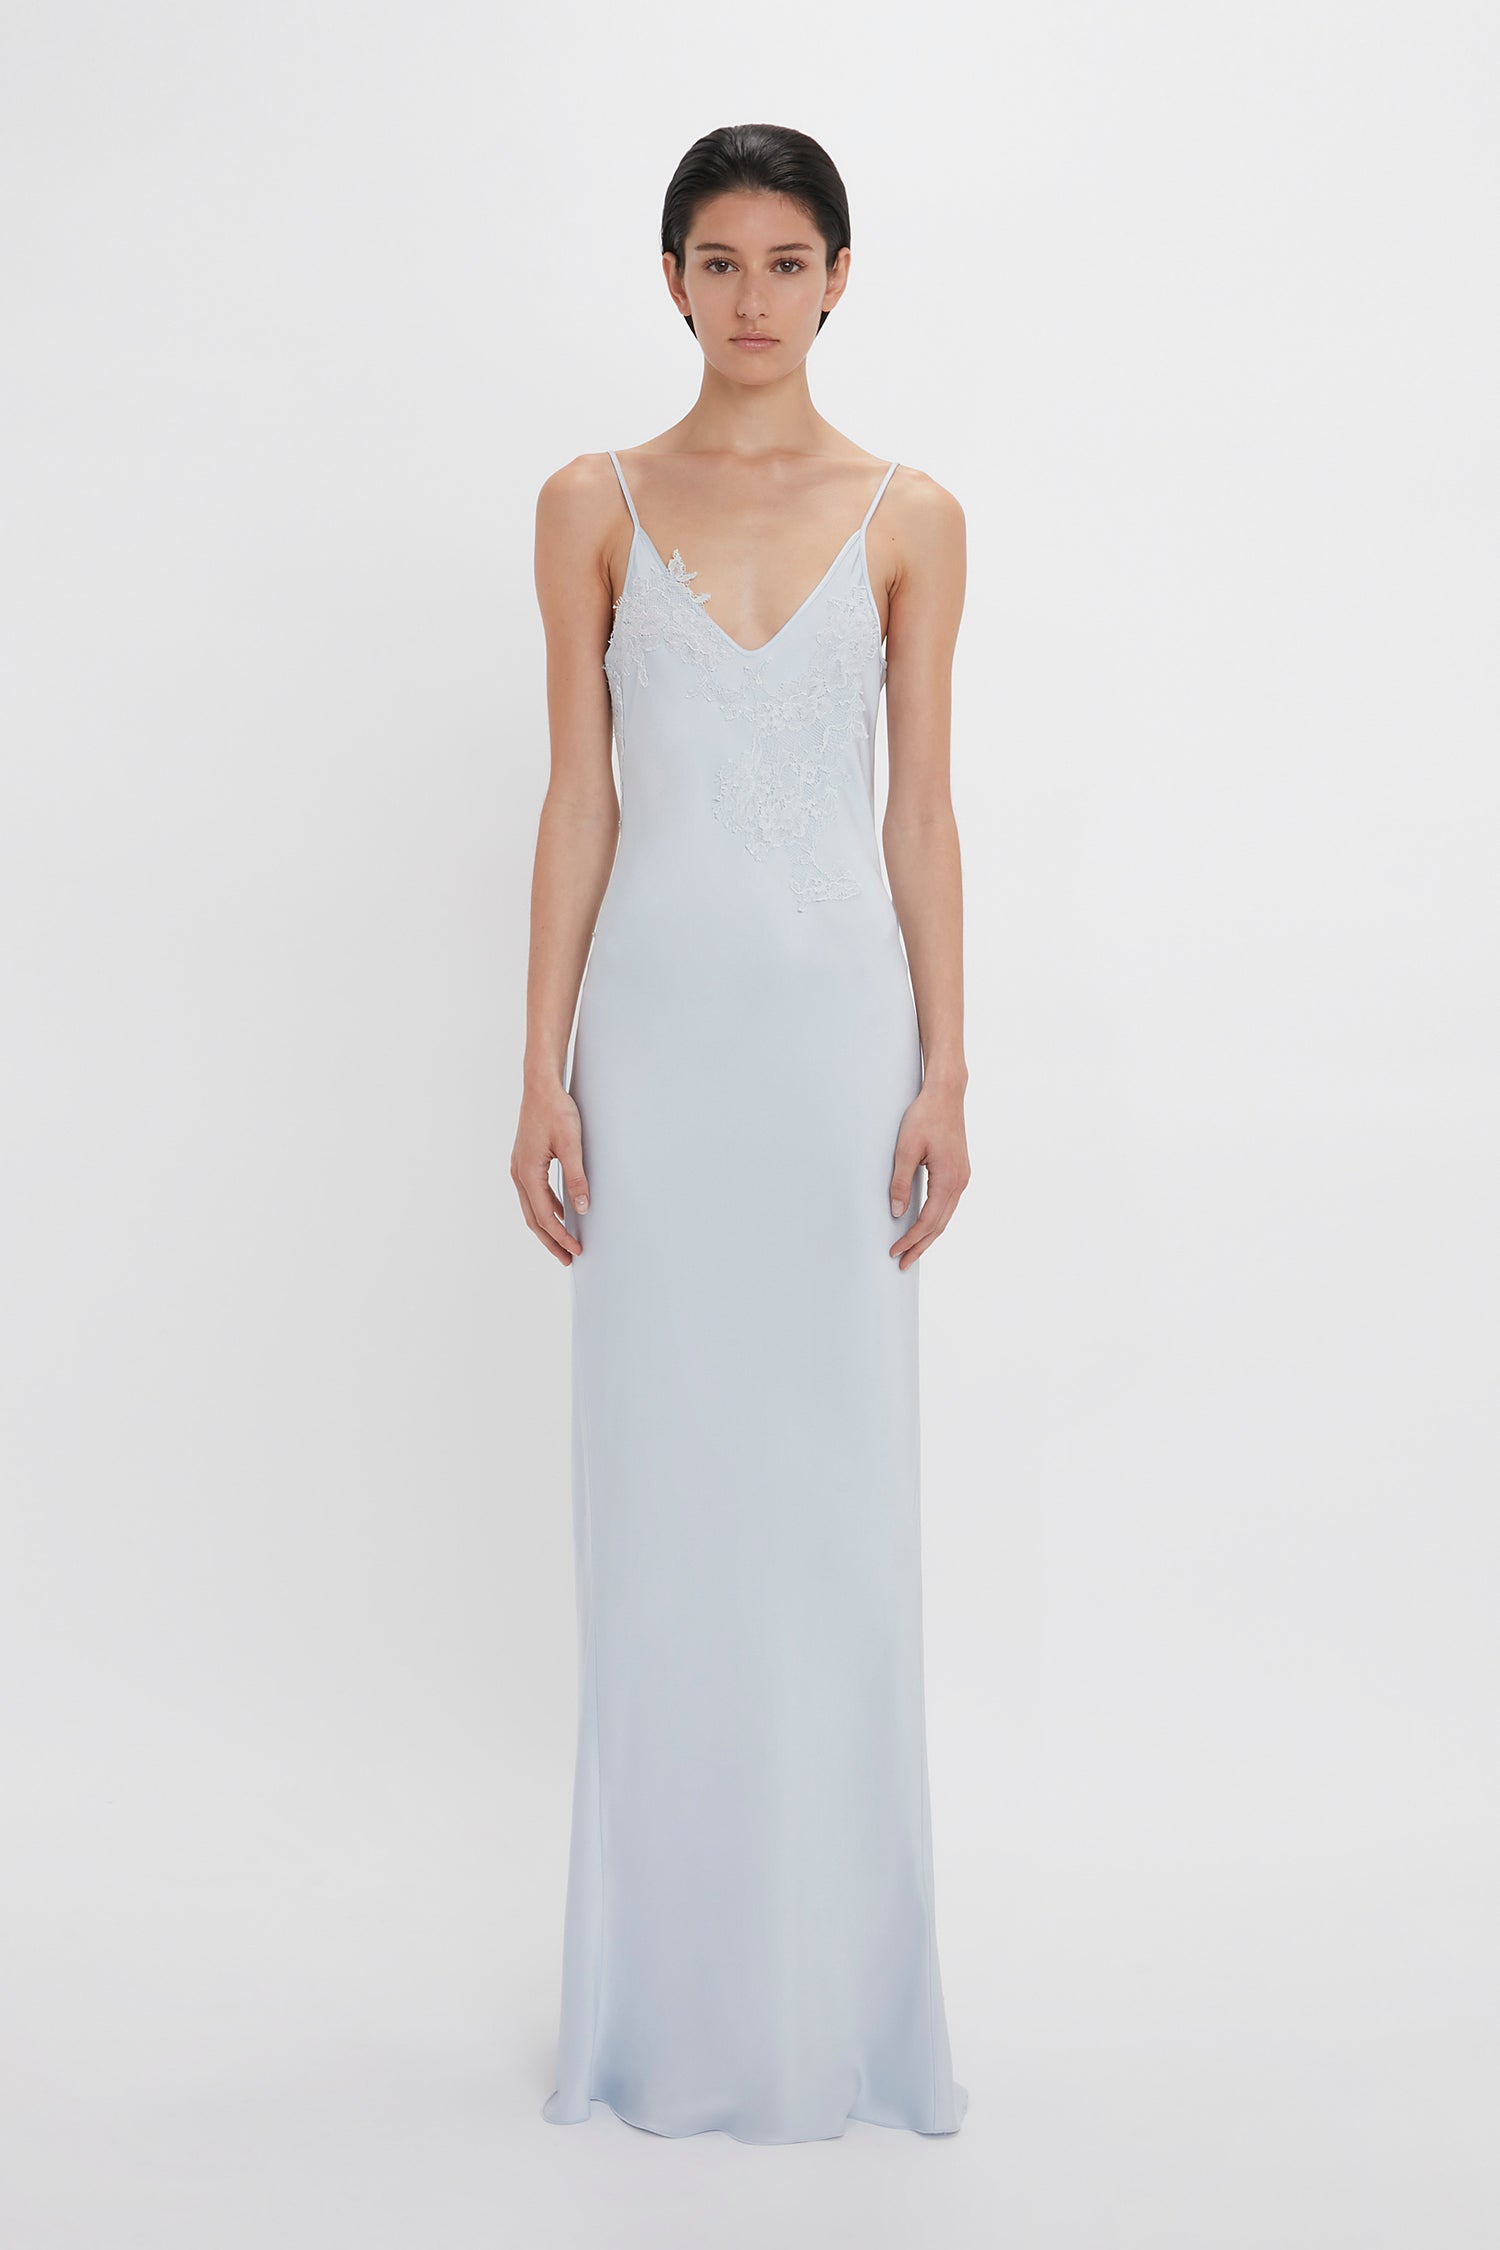 A woman in a Victoria Beckham Exclusive Lace Detail Floor-Length Cami Dress In Ice, standing against a white background.